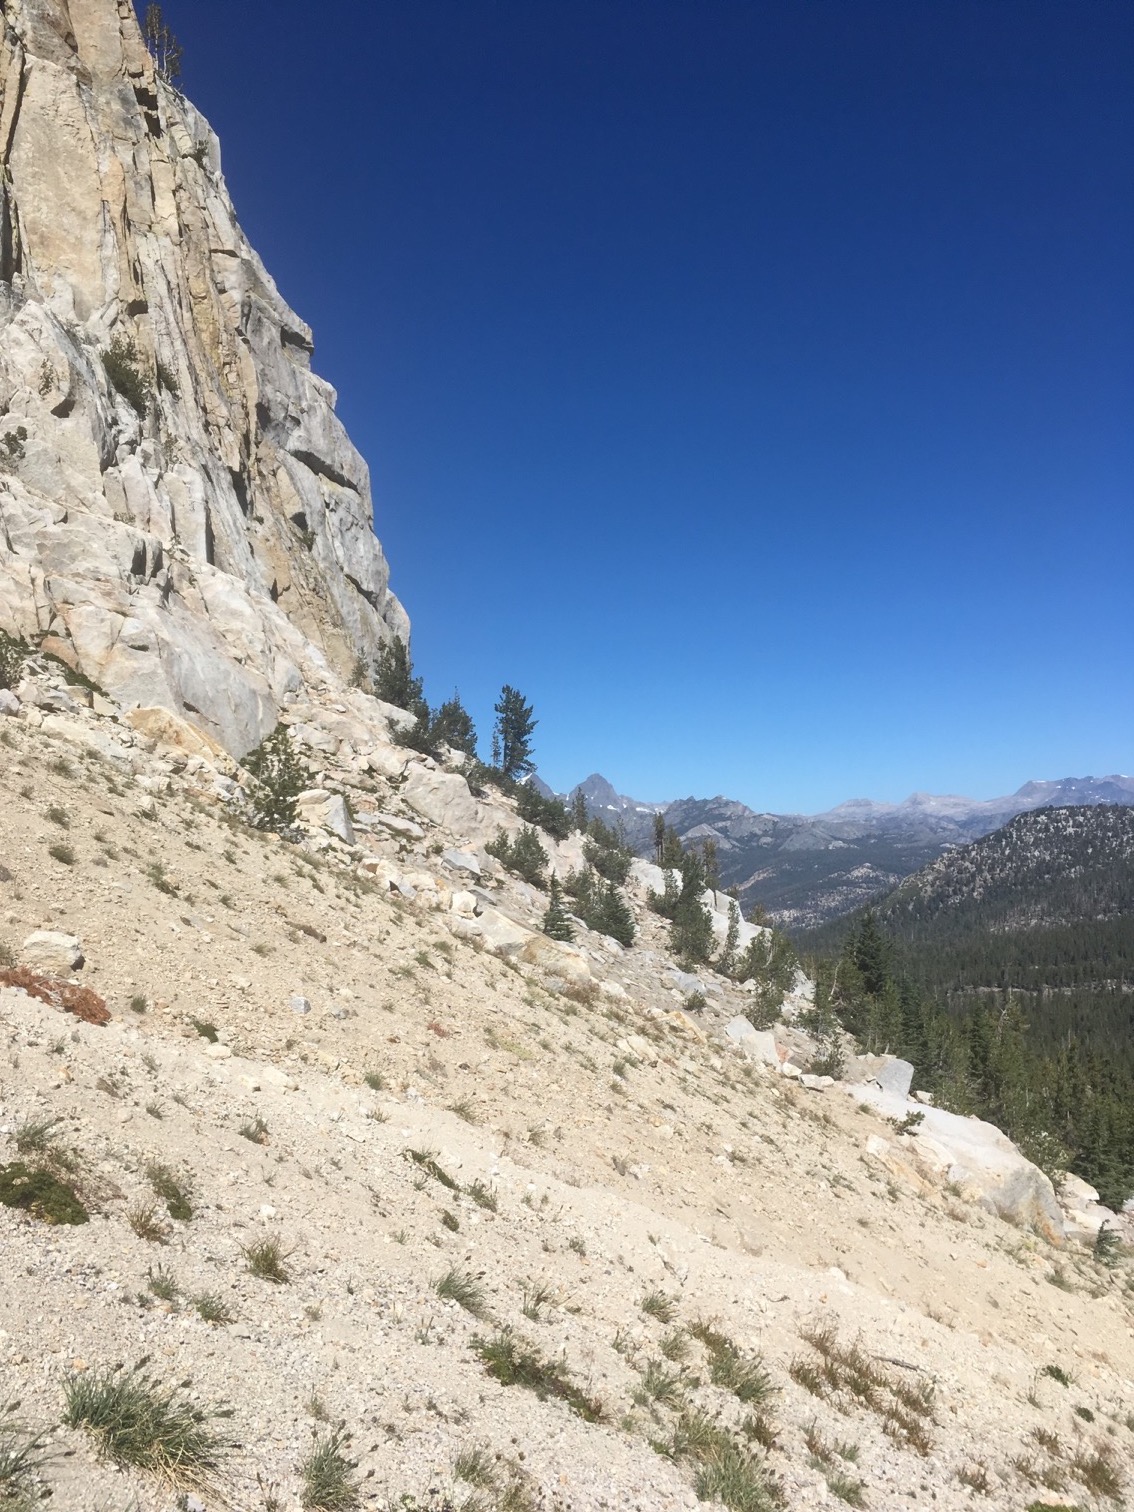 Approaching Mammoth Crest